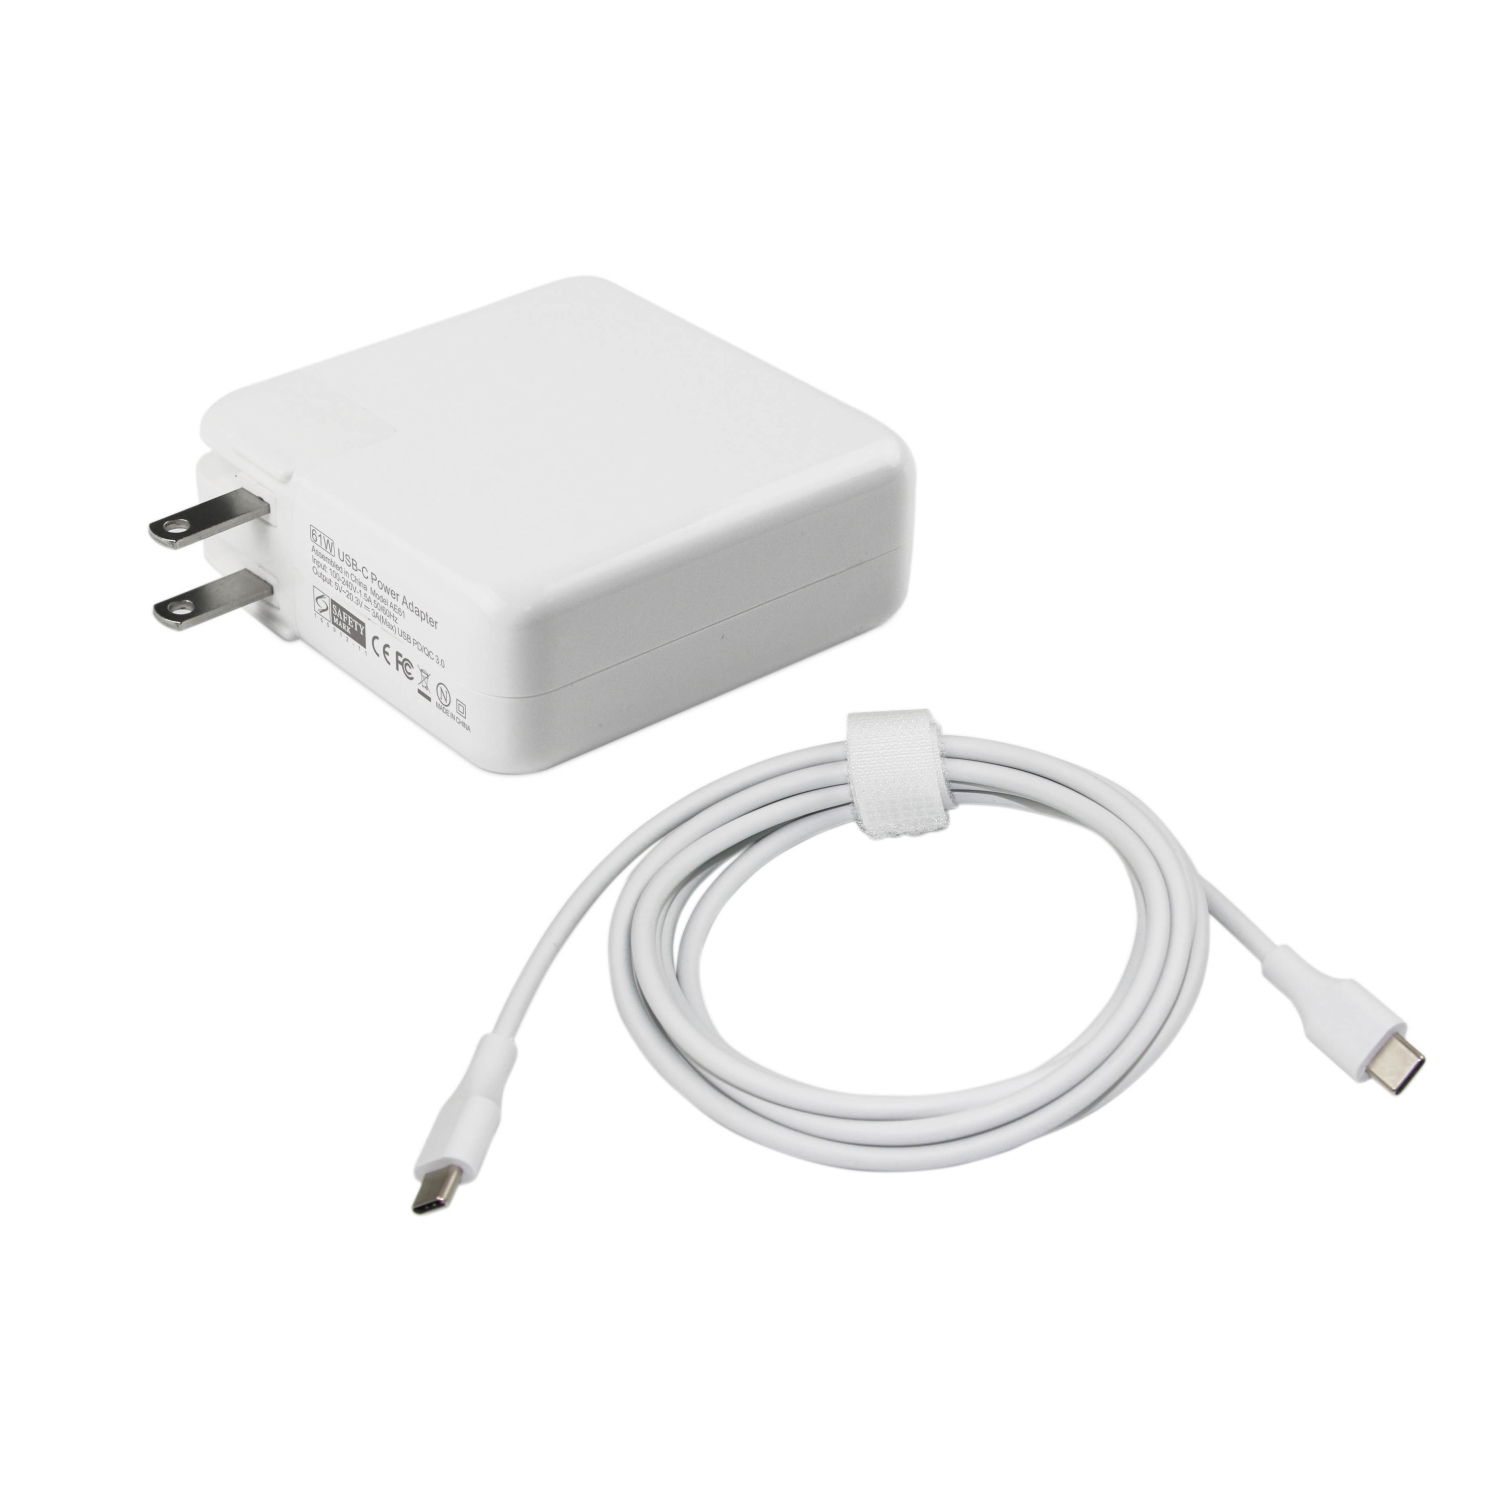 USB-C 61W Type C USB-C Charger for MacBook/Pro, Lenovo/ASUS/Acer/Dell/Huawei/HP and Other Laptops or Phones with USB C